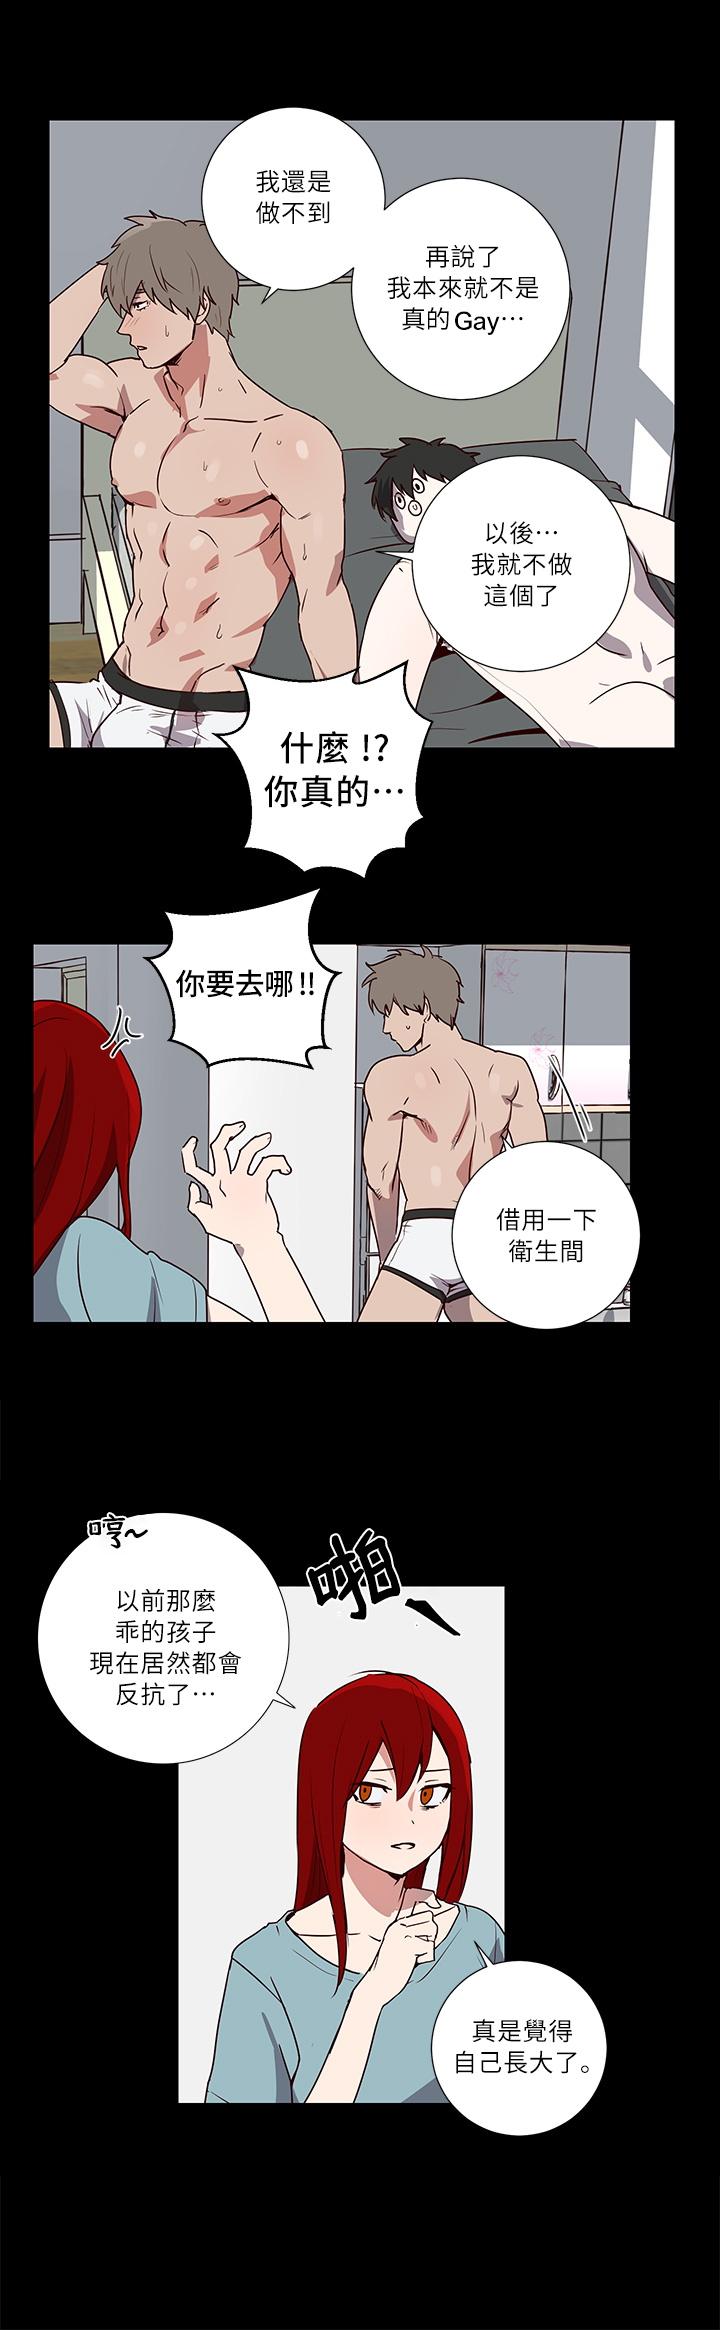 Perfect 莫捡肥皂 01 Chinese Tites - Page 11